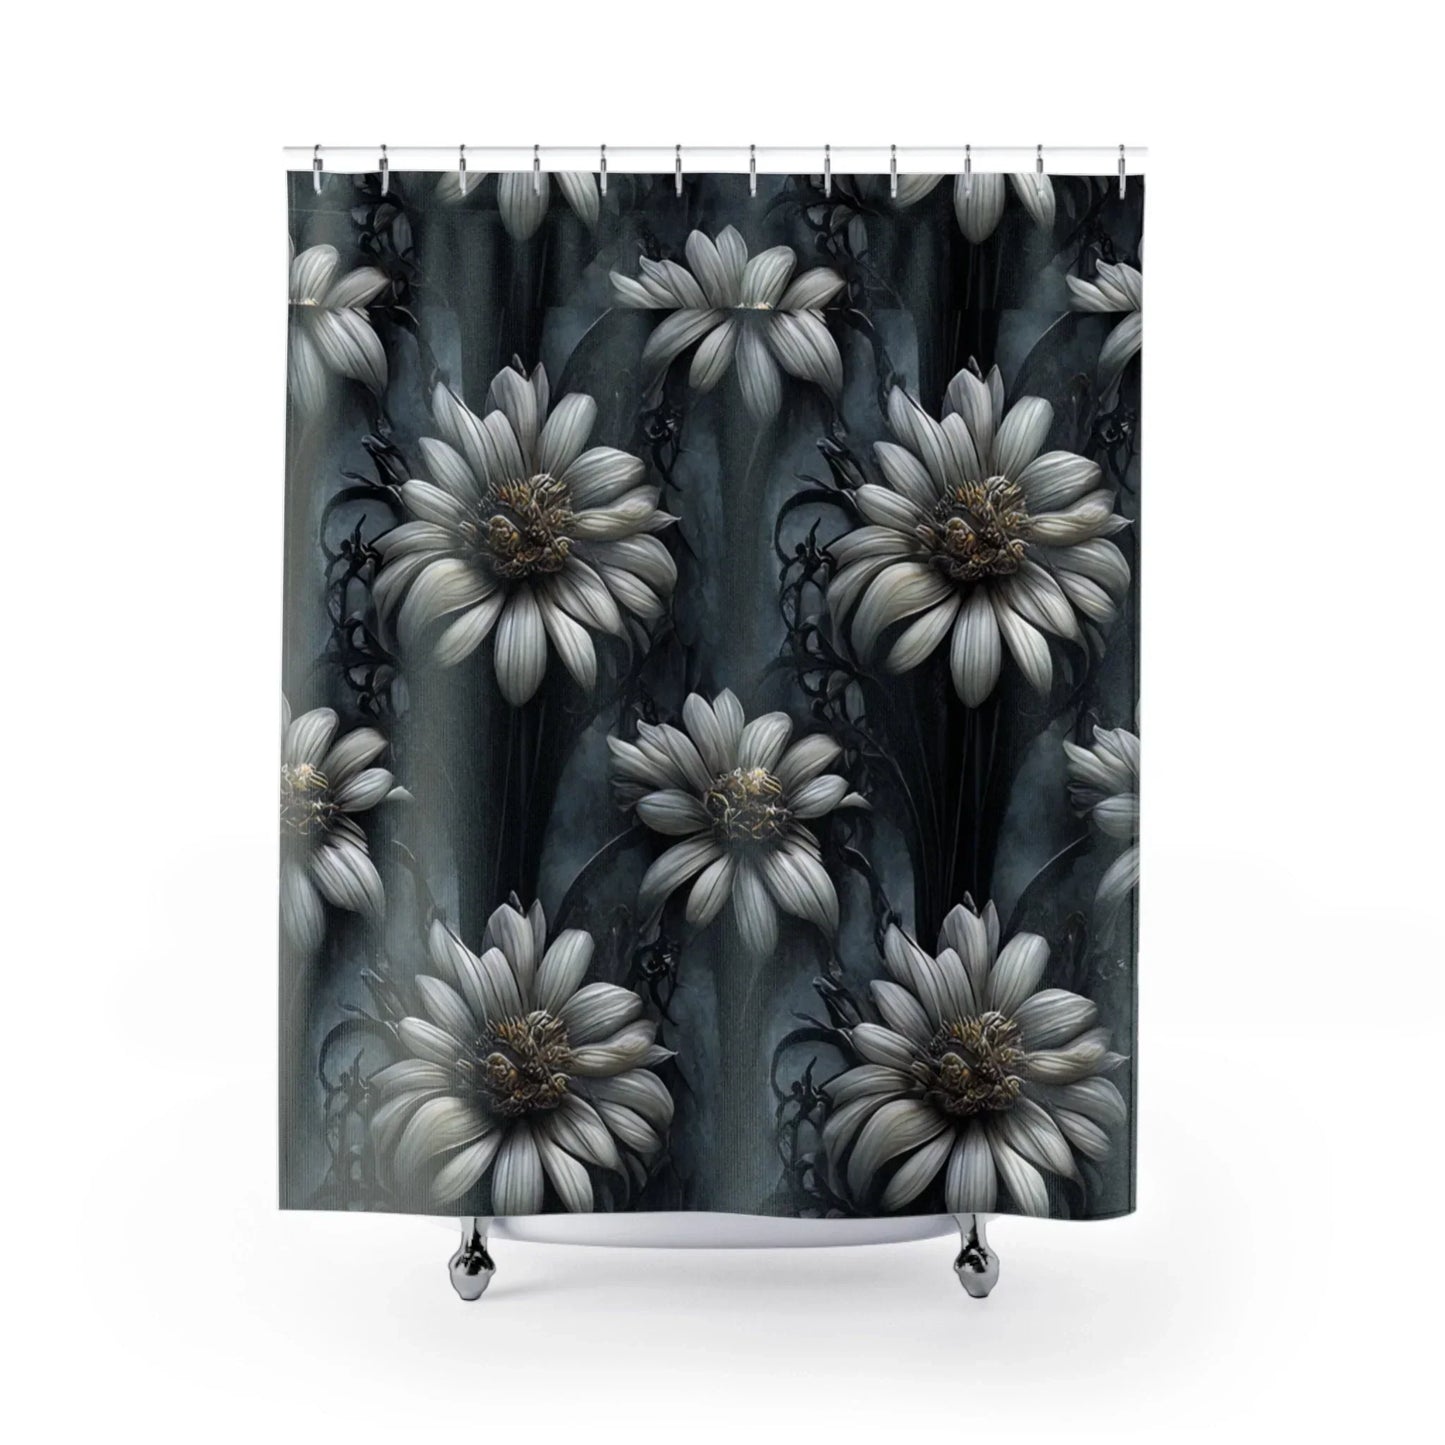 Gothic Shower Curtain, Black Floral Shower Curtain, Gothic Home Decor, Gothic Gifts, Sunflower Goth Shower Curtain Extra Long Shower Curtain HMDesignStudioUS